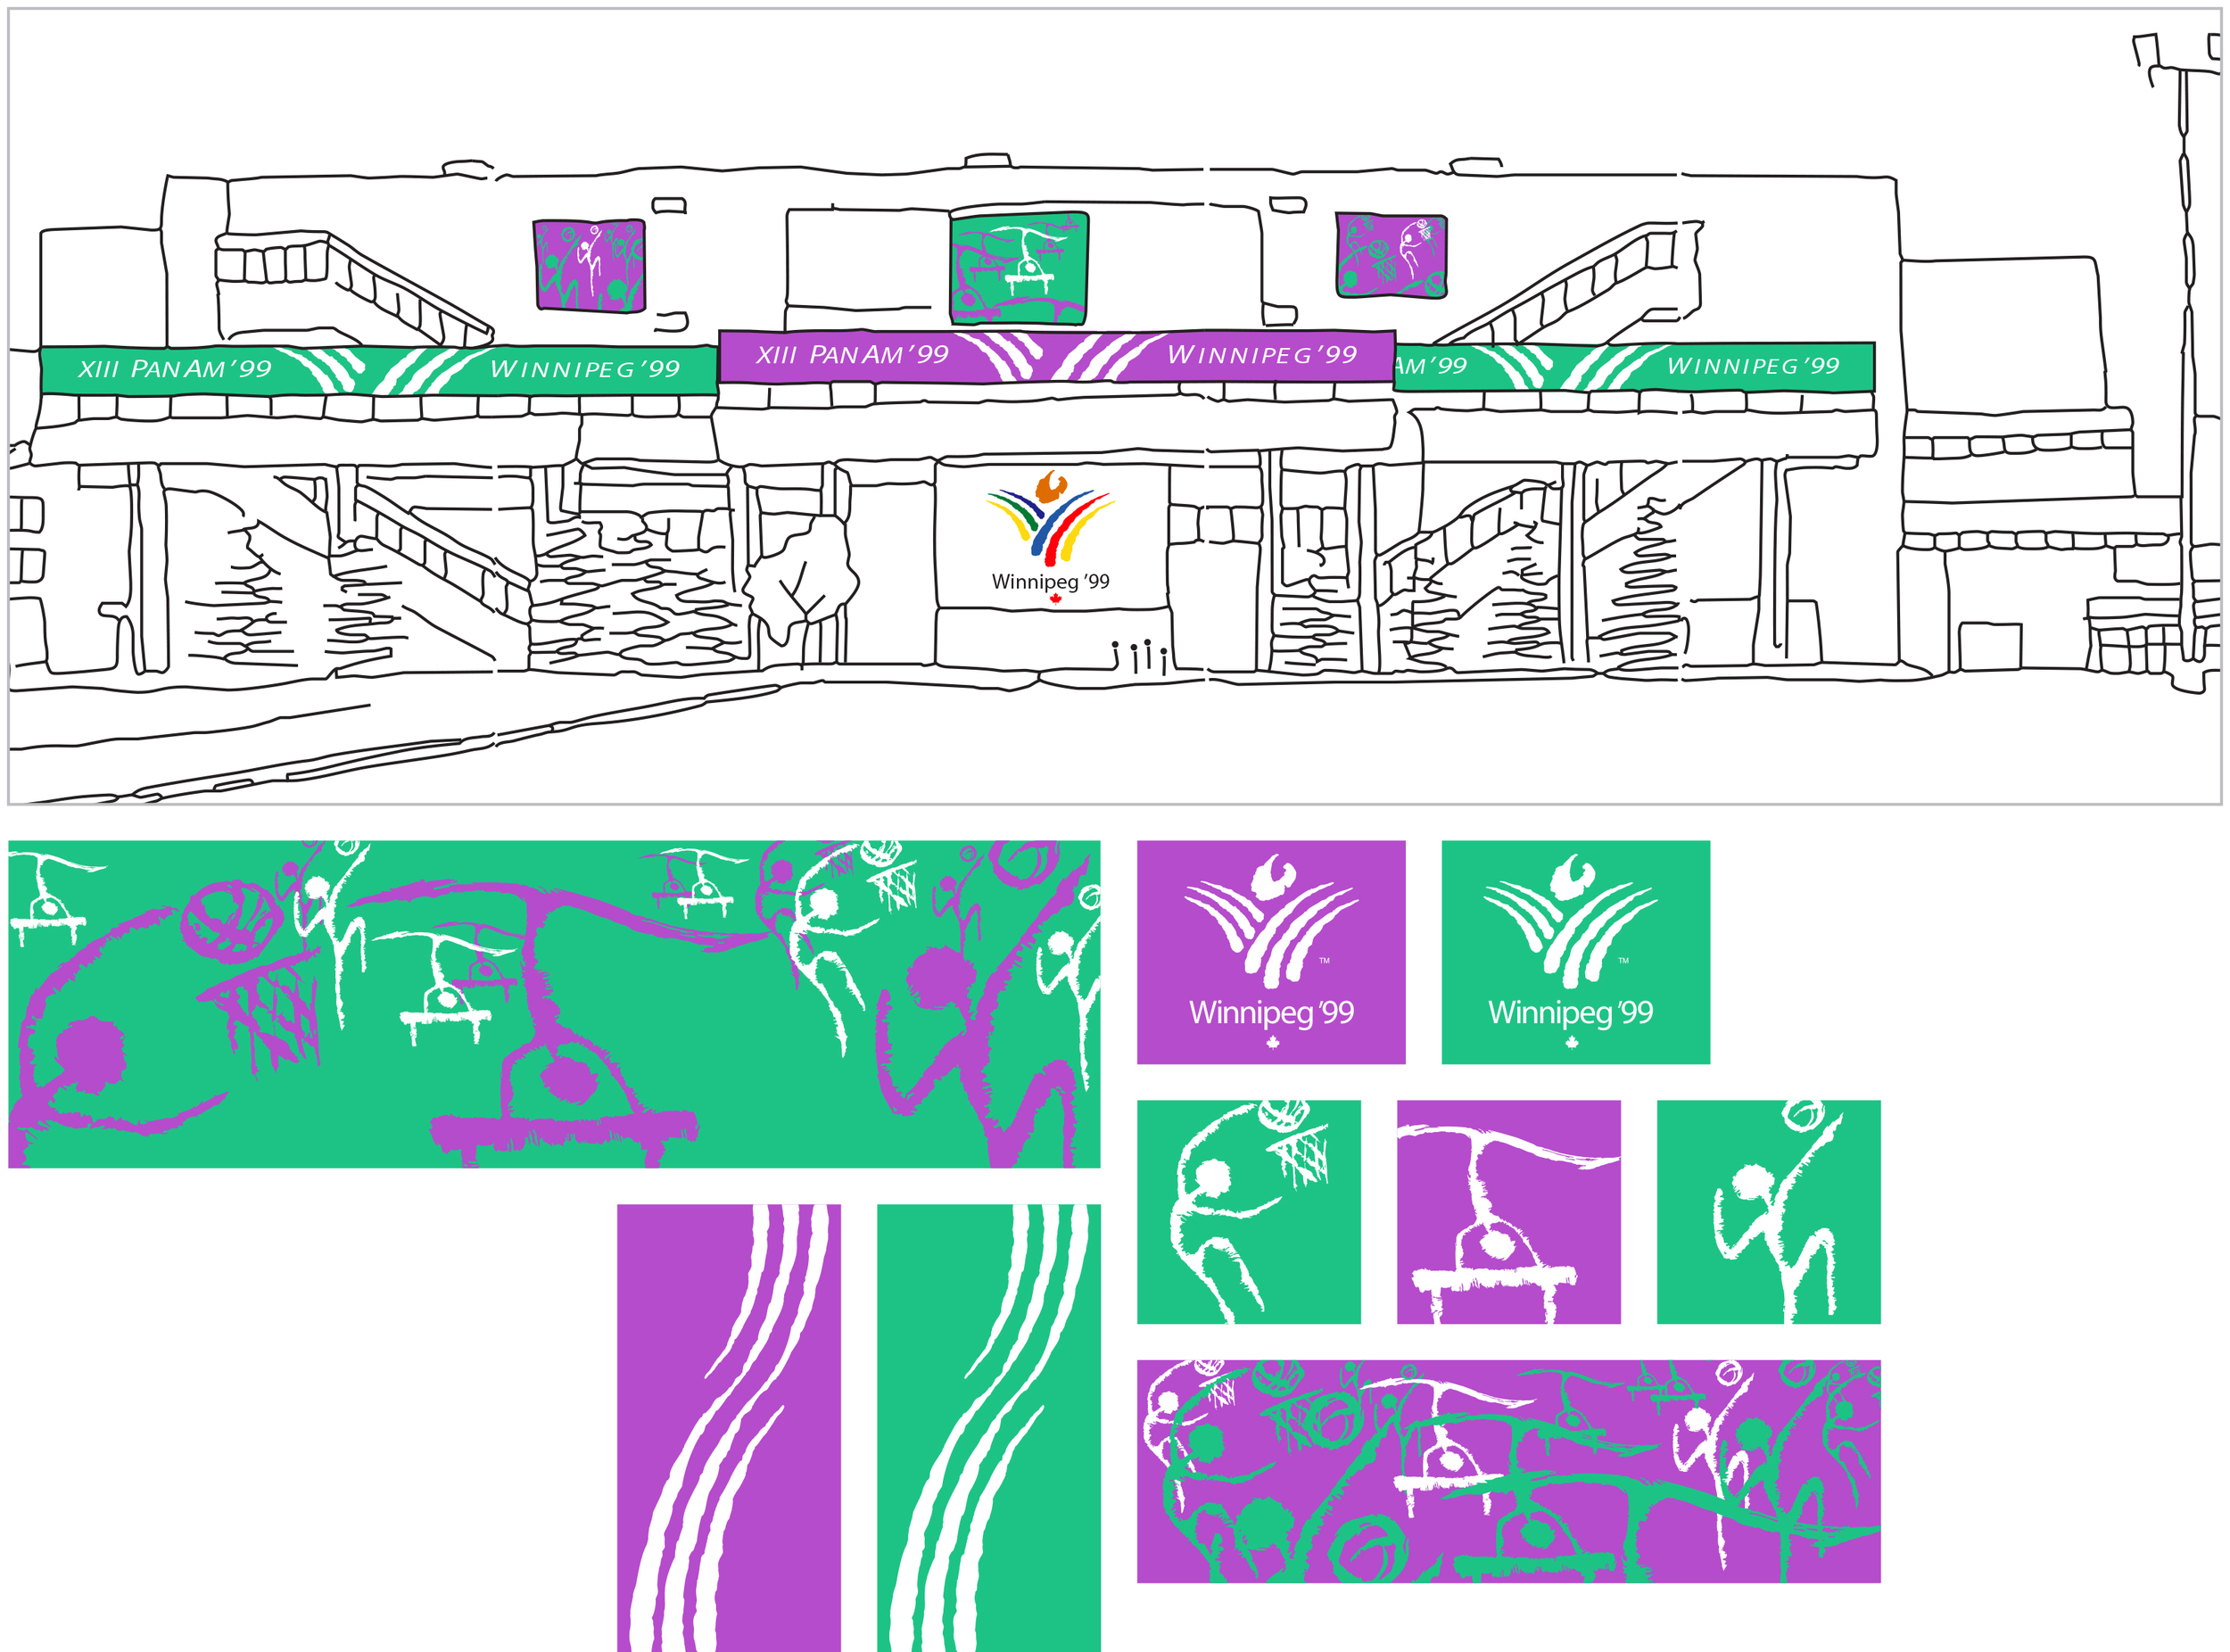 1999 Pan Am Games Site Graphics